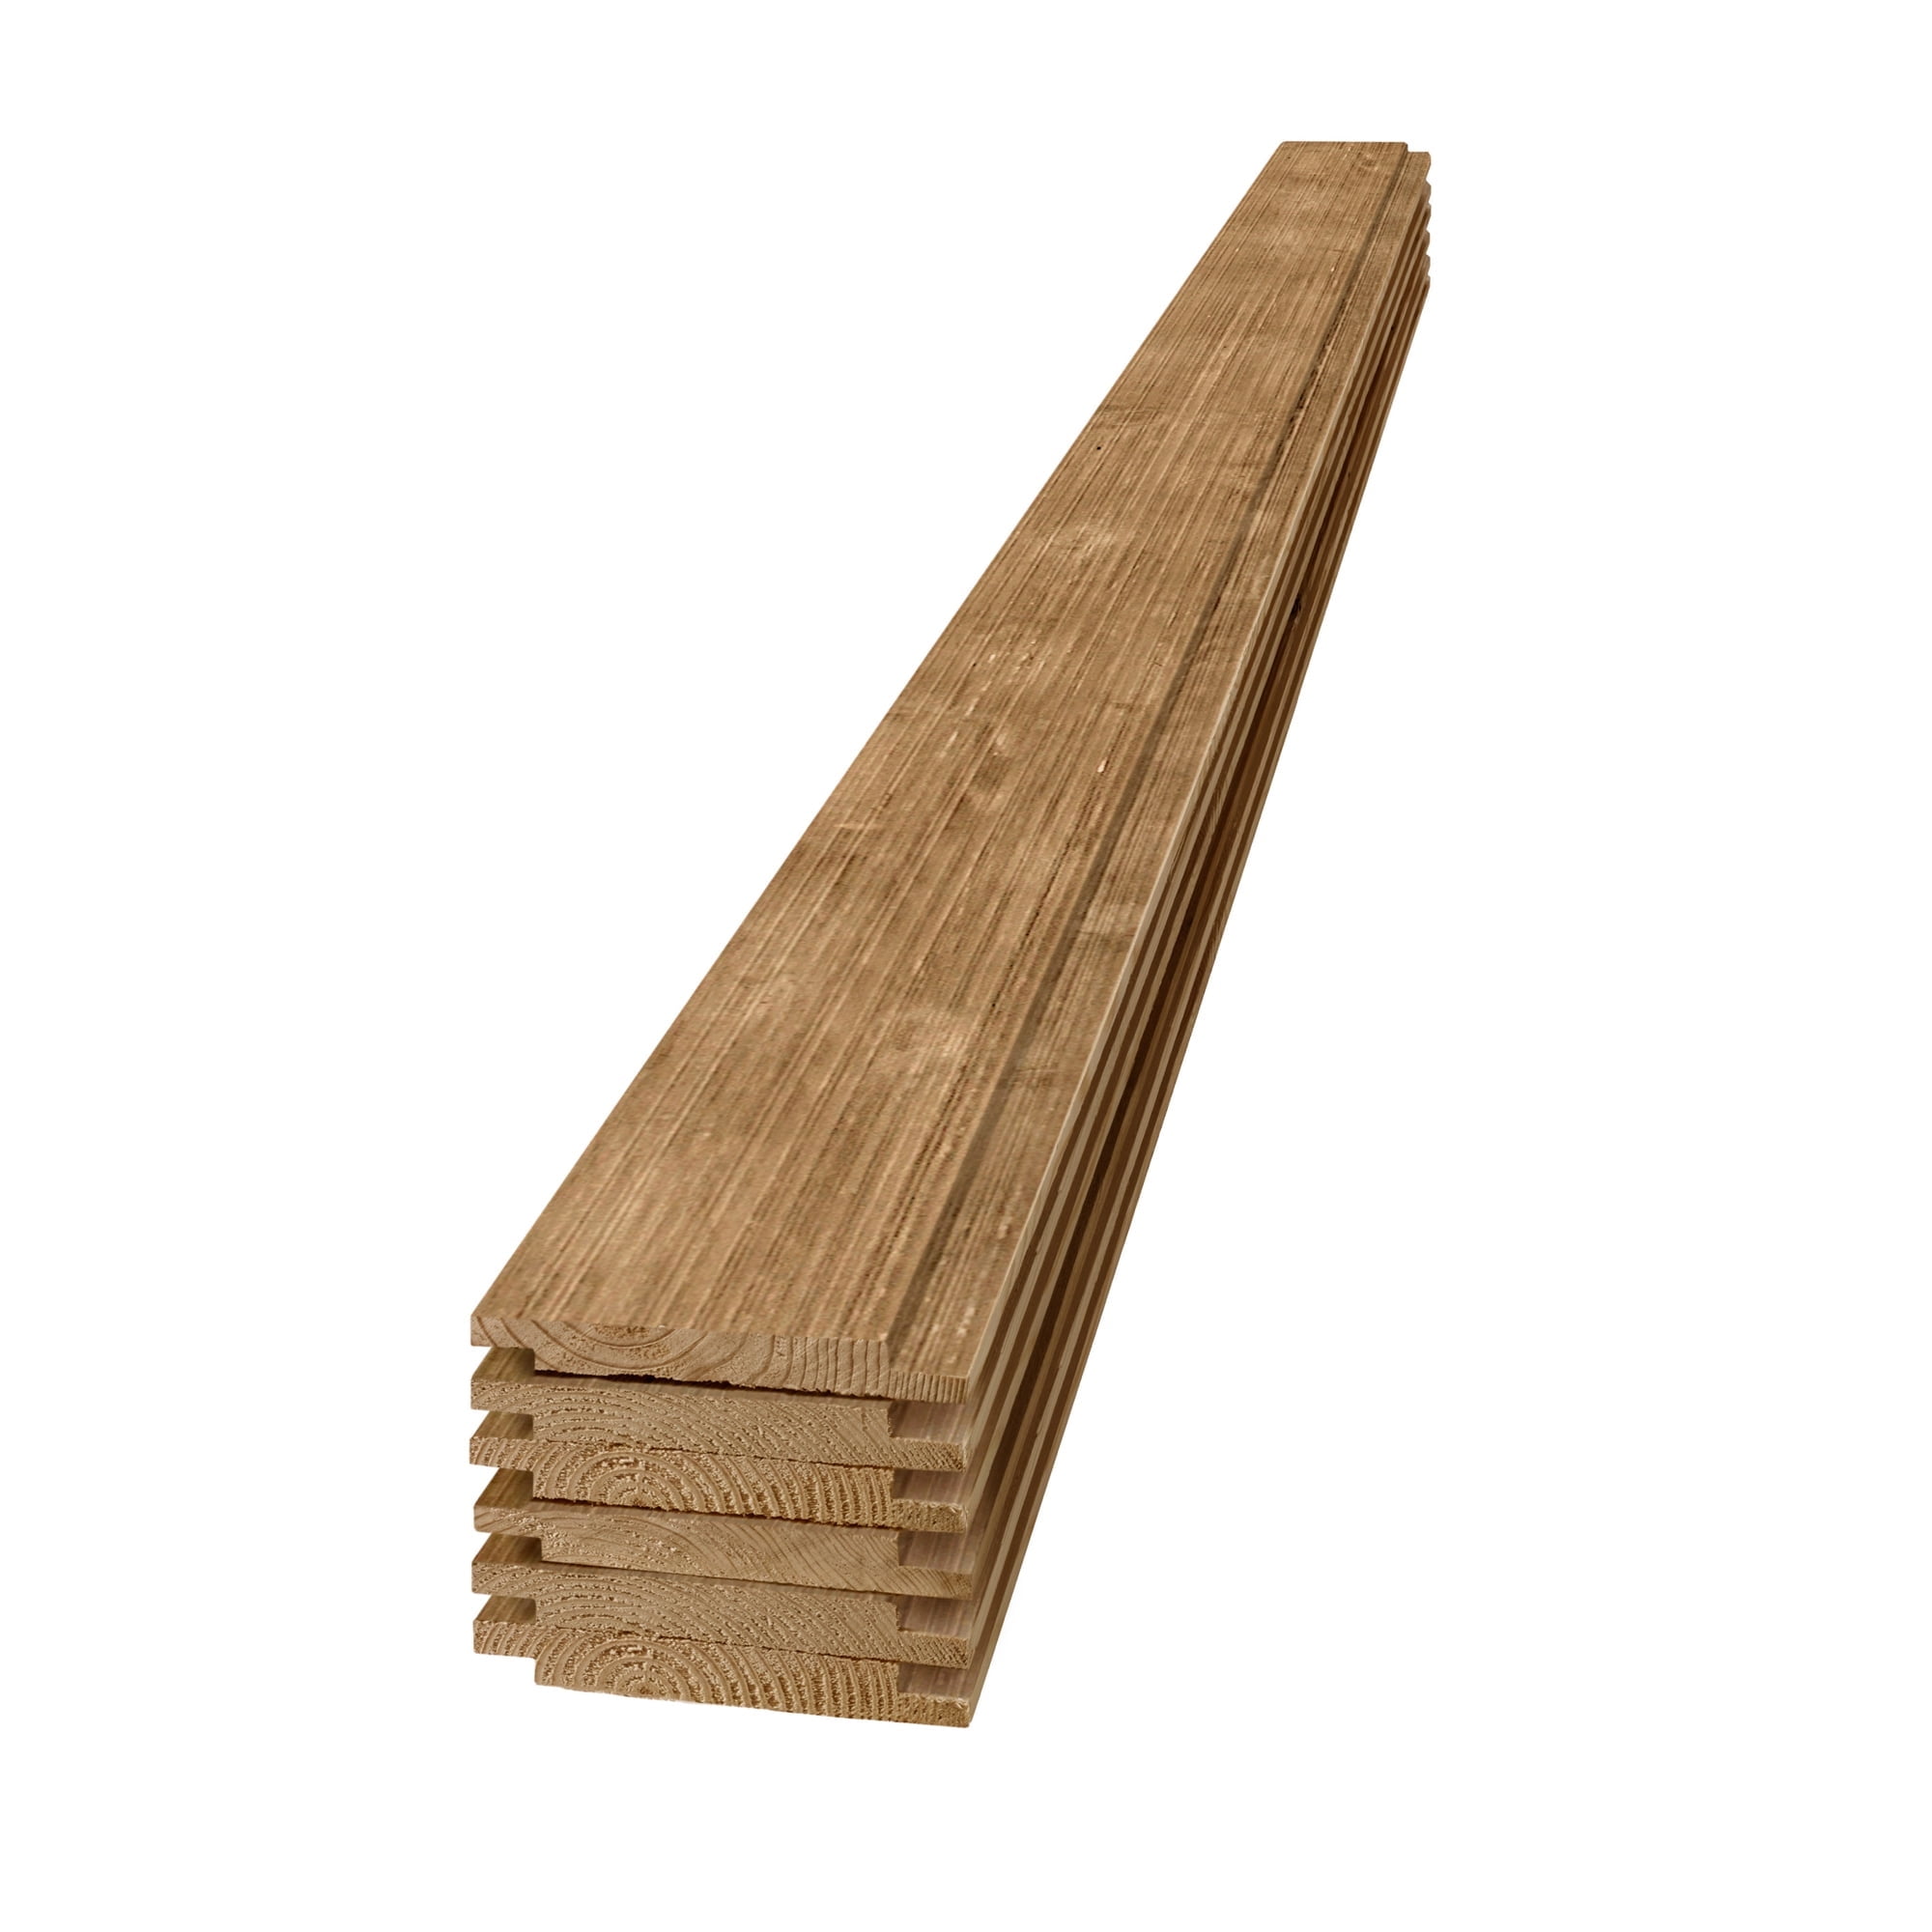 UFP-Edge 1 in. x 6 in. x 6 ft. Barn Wood Natural Pine Shiplap Board (6-pack)